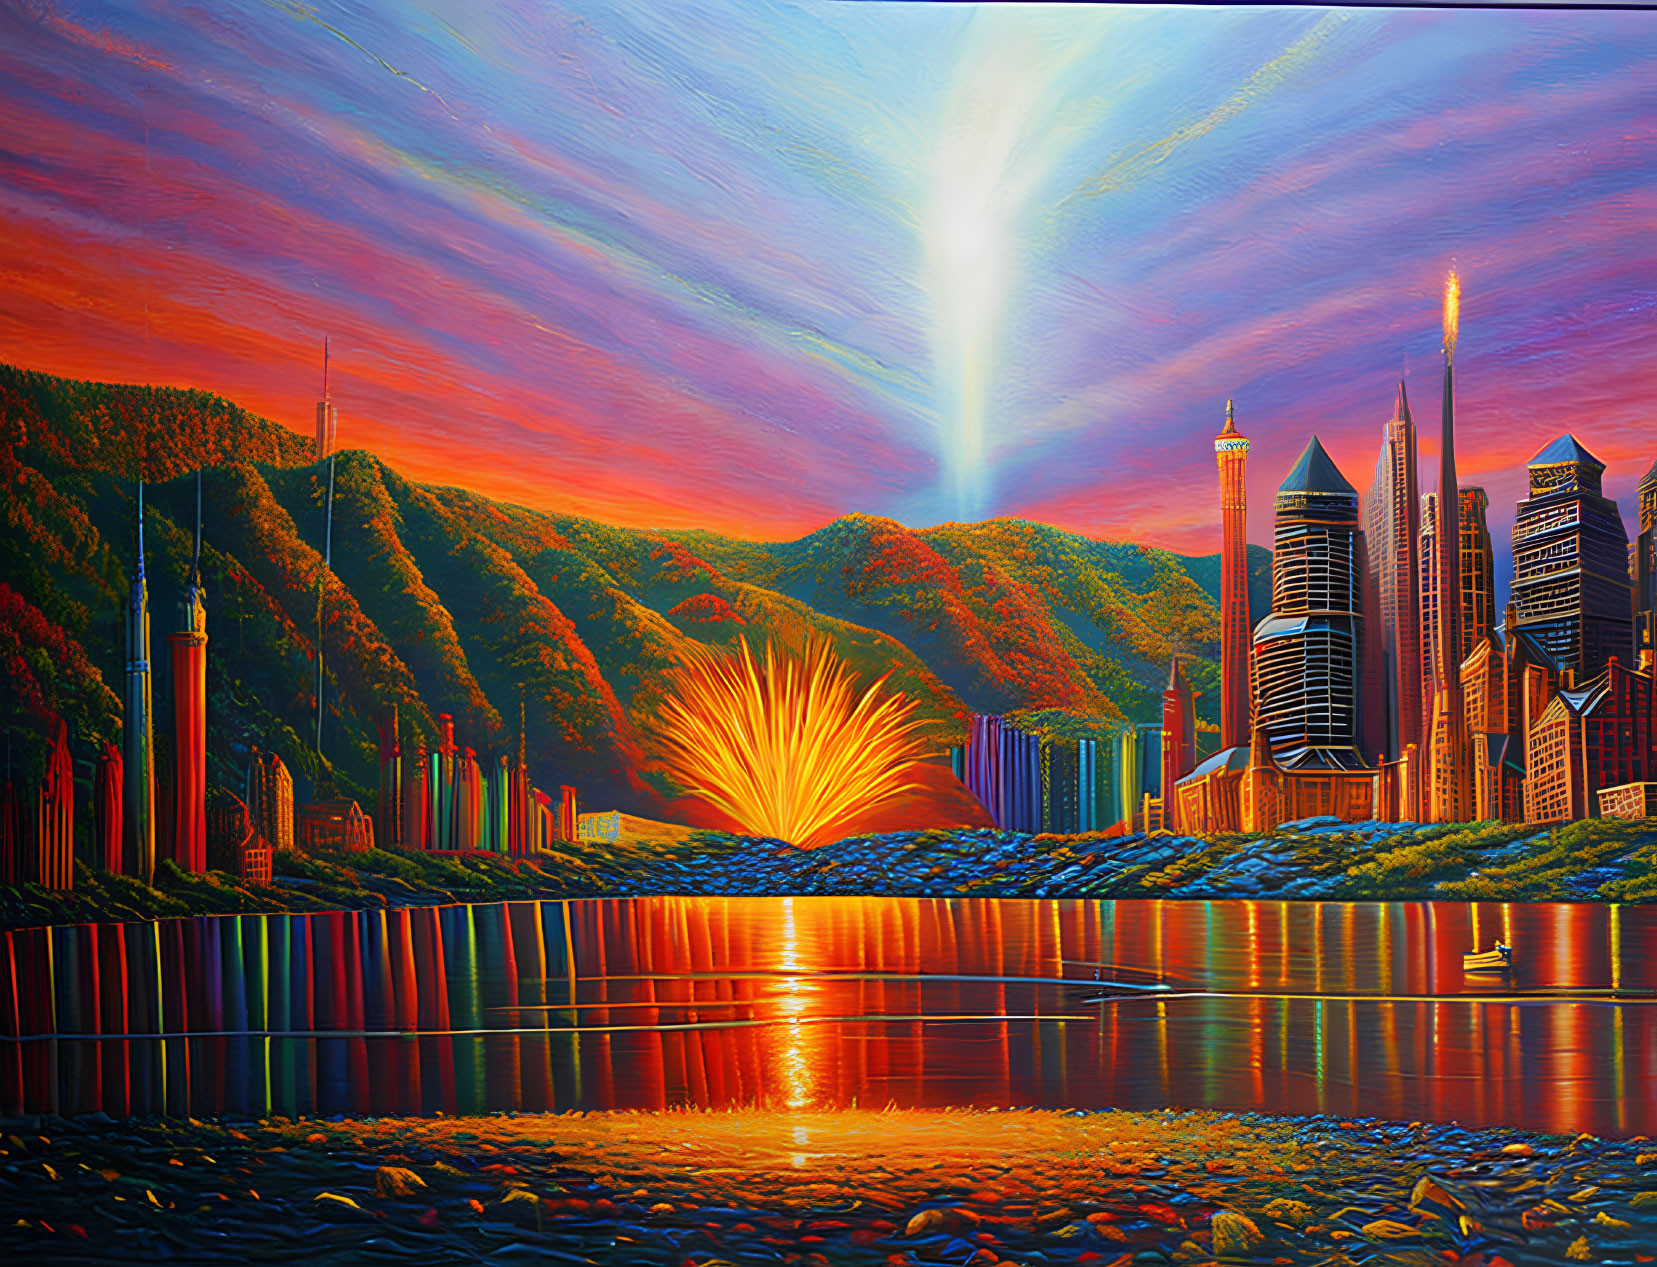 Colorful surreal landscape with sunset sky, mountains, water, fireworks, and futuristic cityscape.